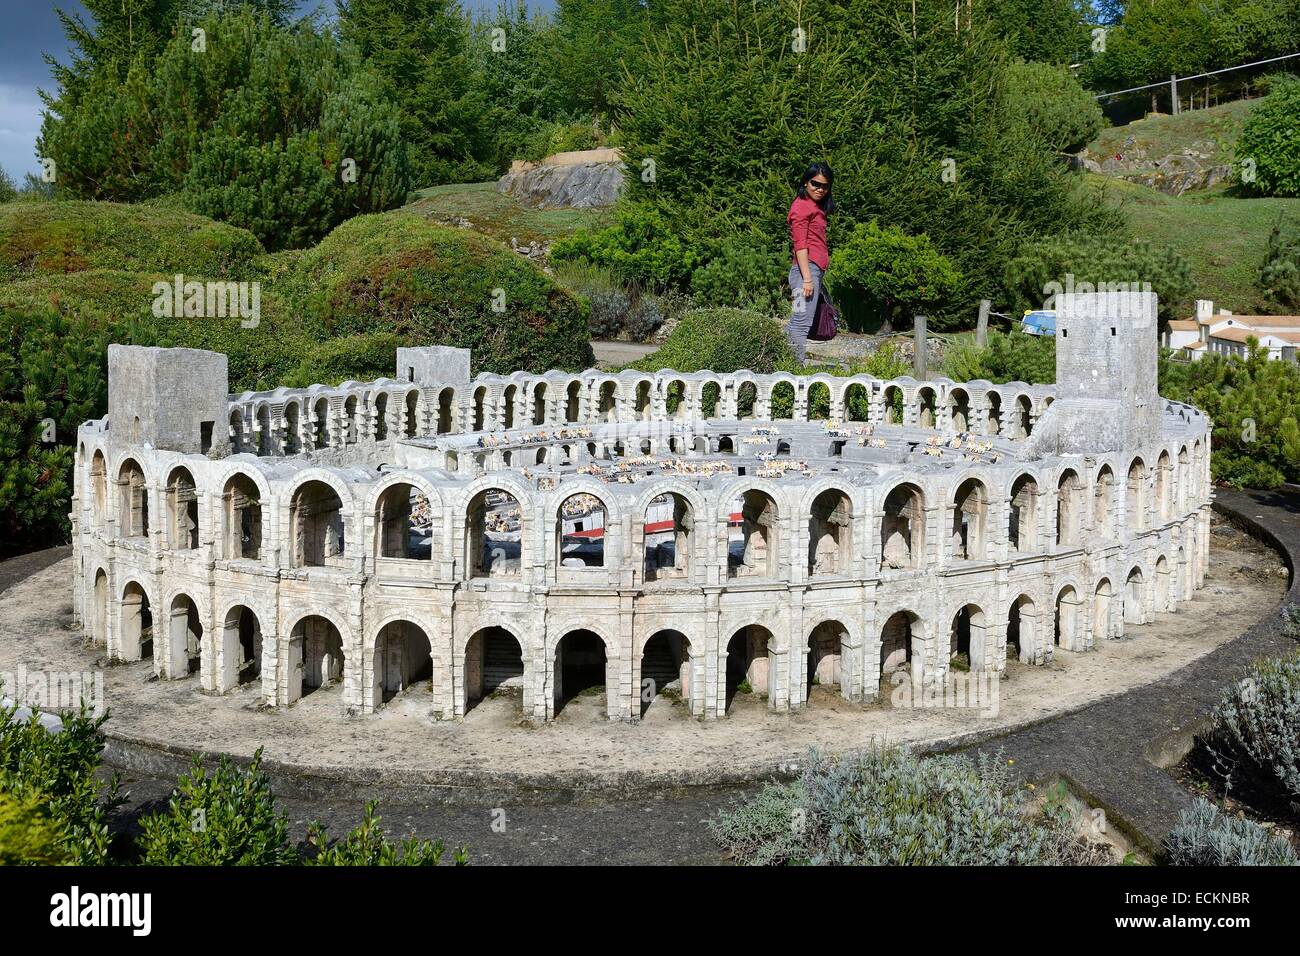 France, Yvelines, Elancourt, France Miniature attraction park, the scale model of Arles amphitheater Stock Photo